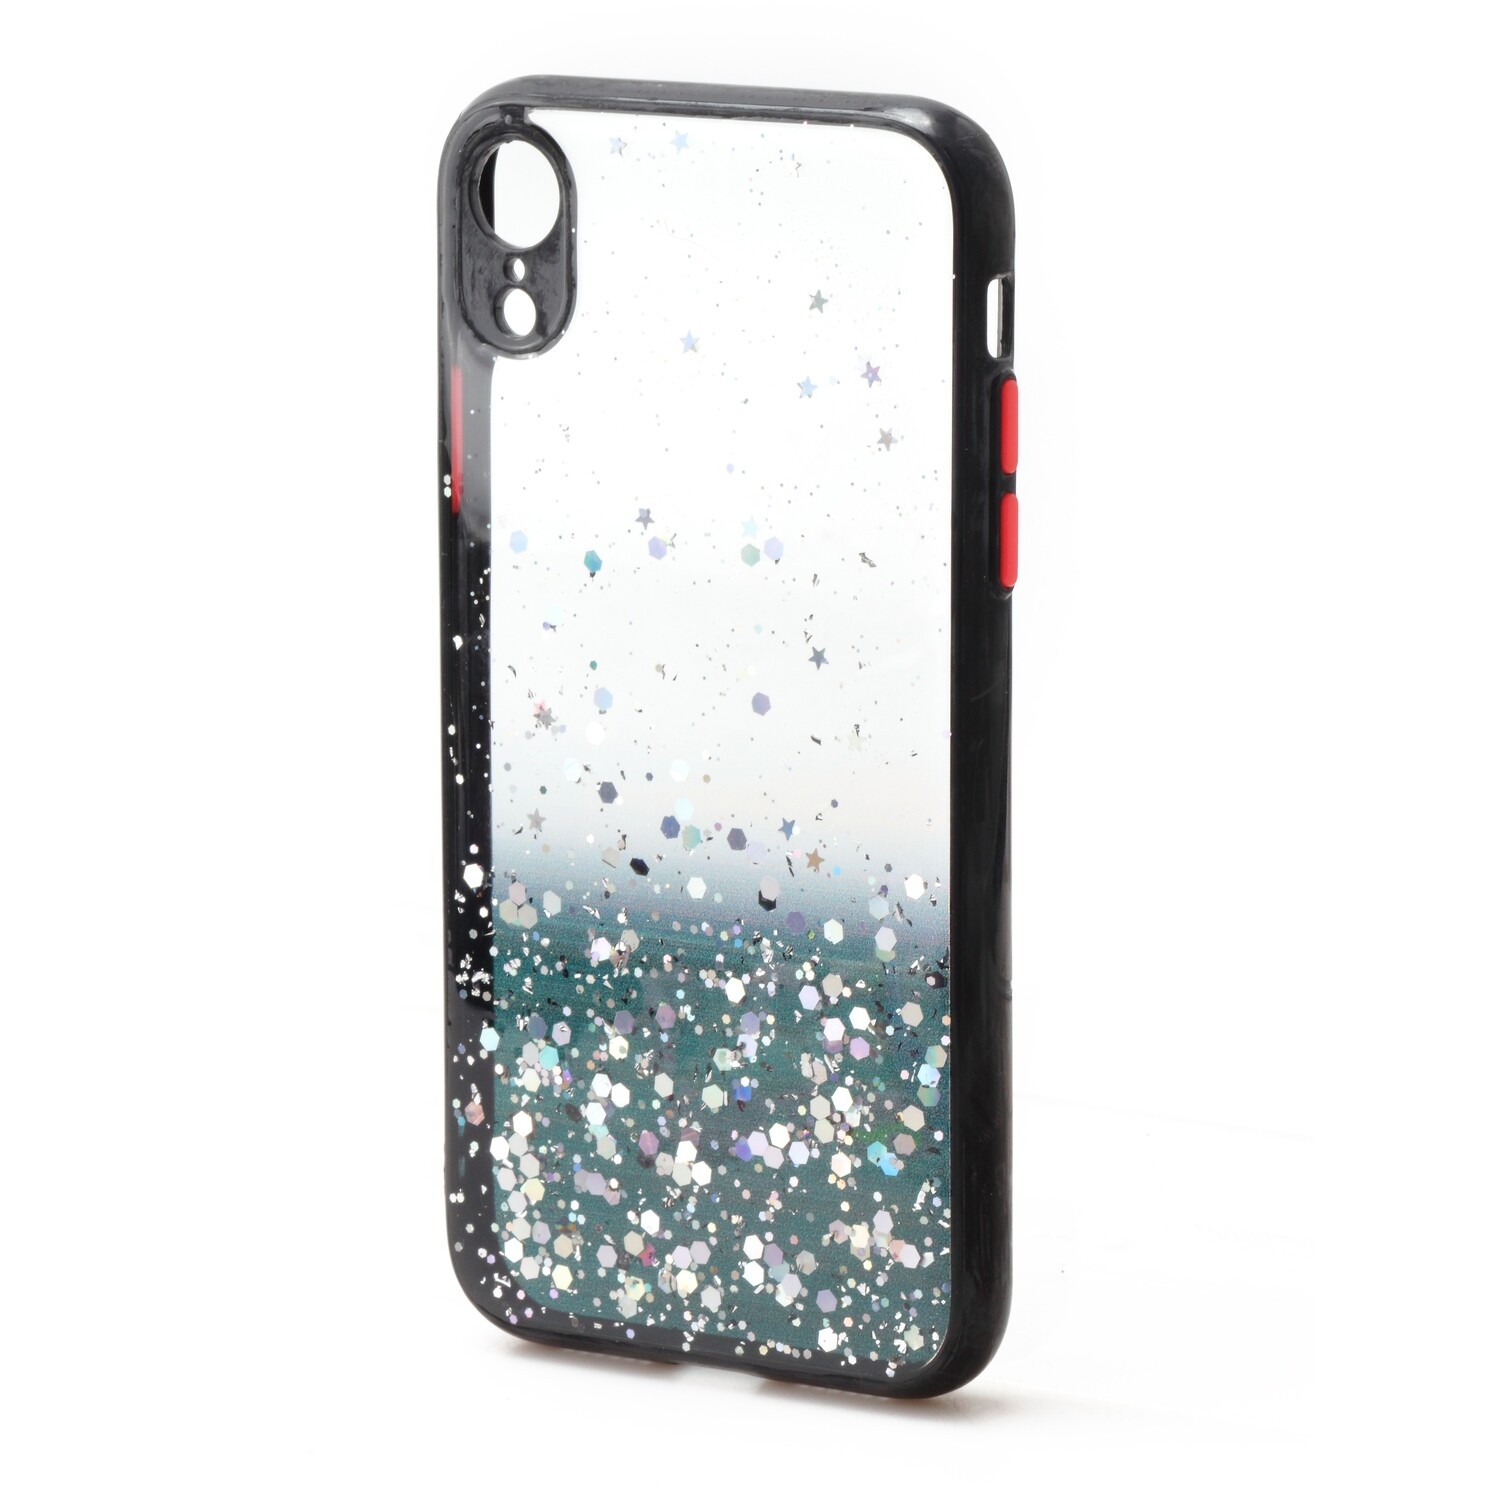 iPhone XR 6.1 Shinning Gradient Case, Color: Black